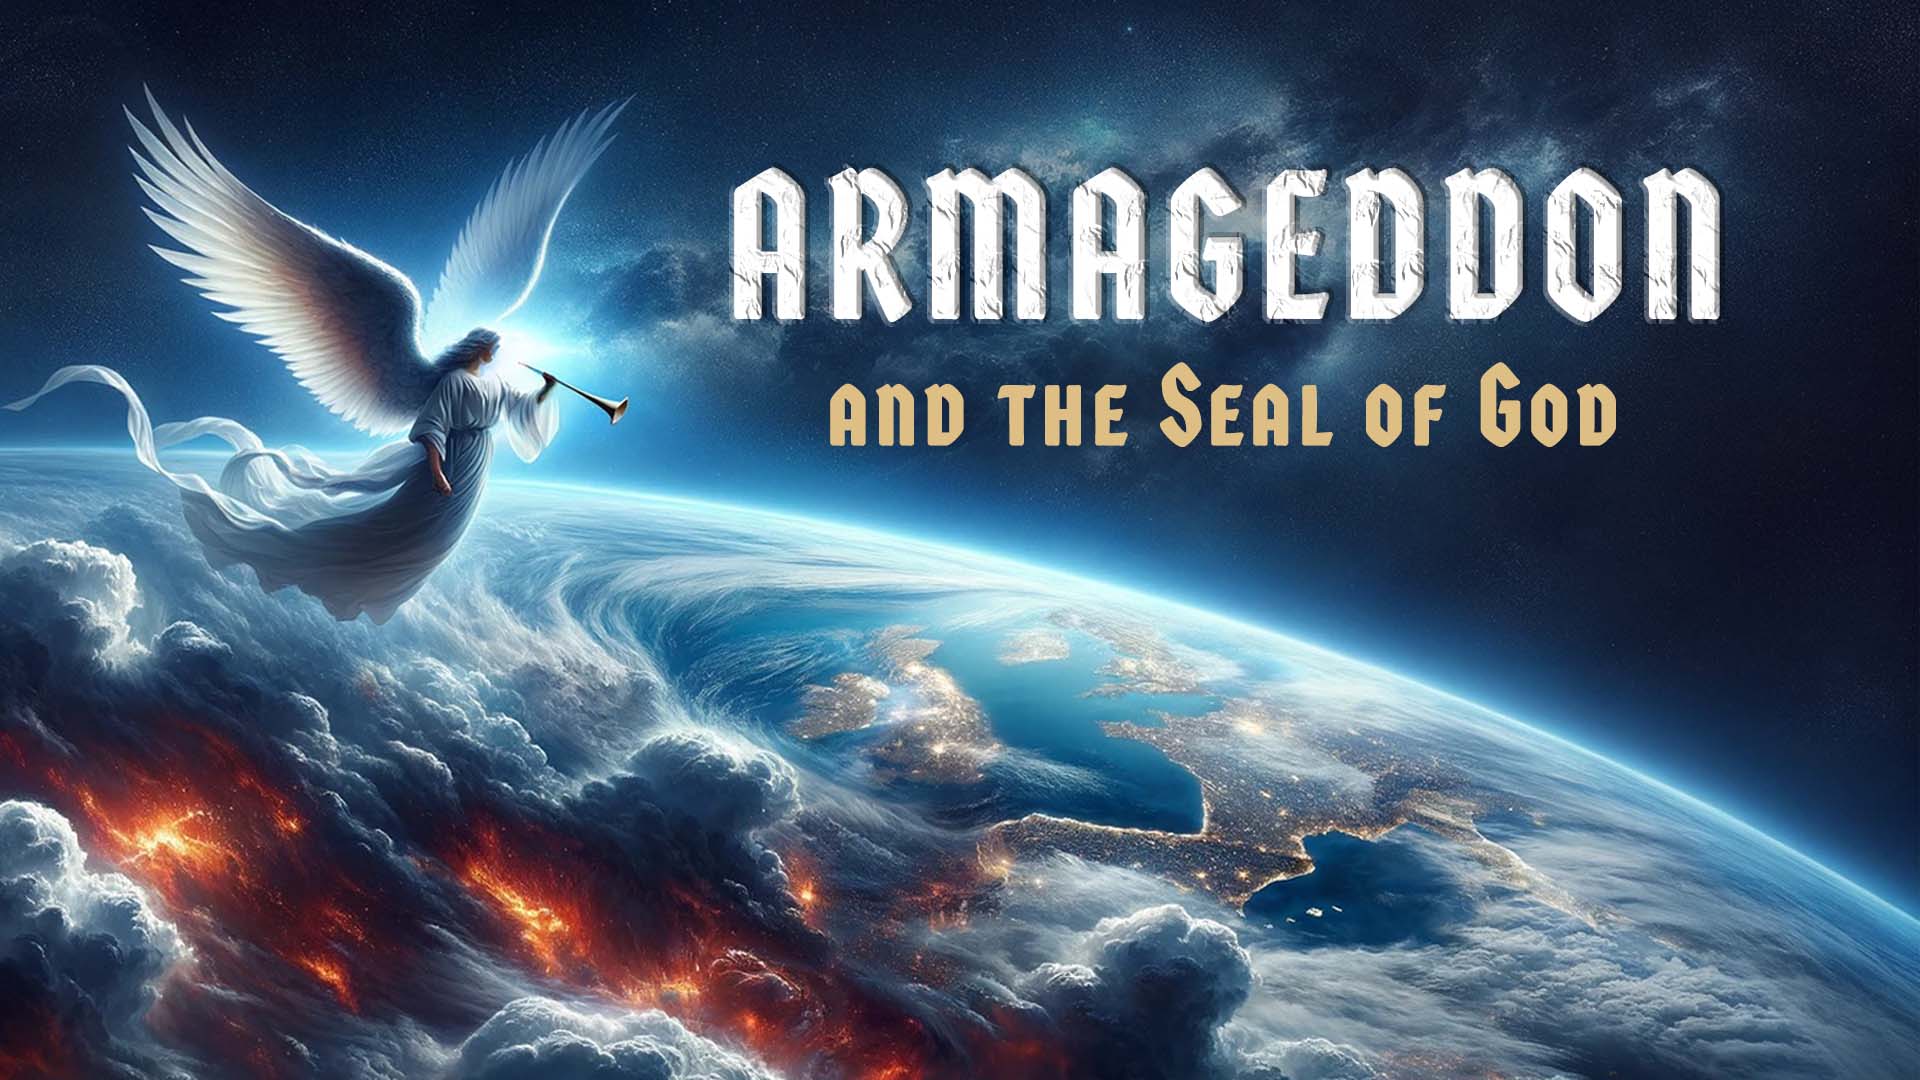 Armageddon and the Seal of God